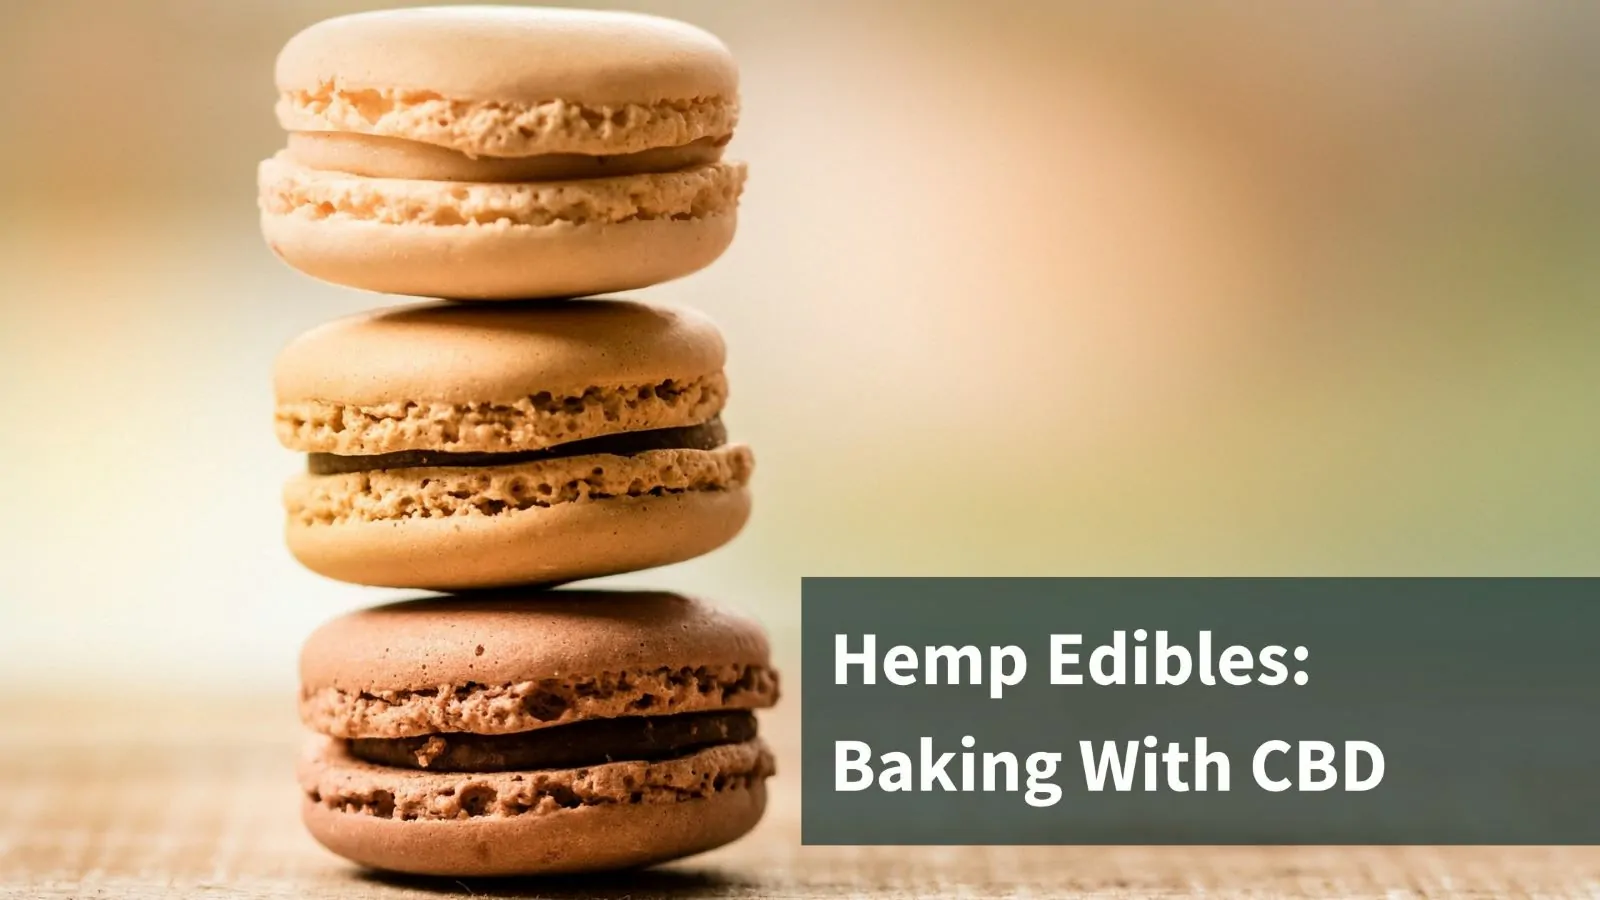 Hemp Edibles: Your Quick and Fun Guide To Baking With CBD